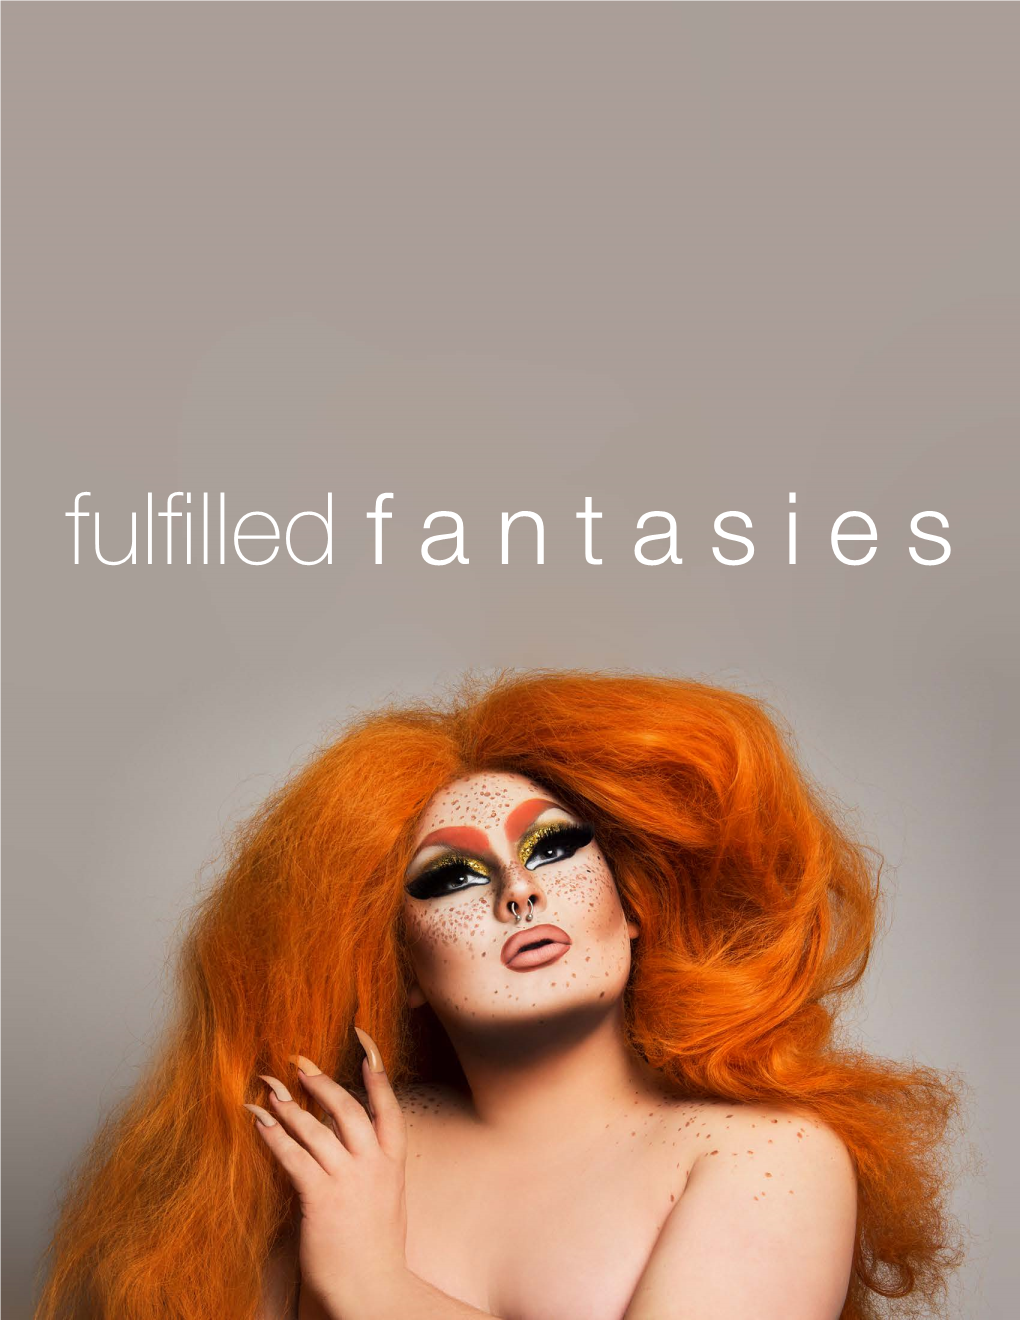 Fulfilled Fantasies About the Exhibition February 28 - April 1, 2019